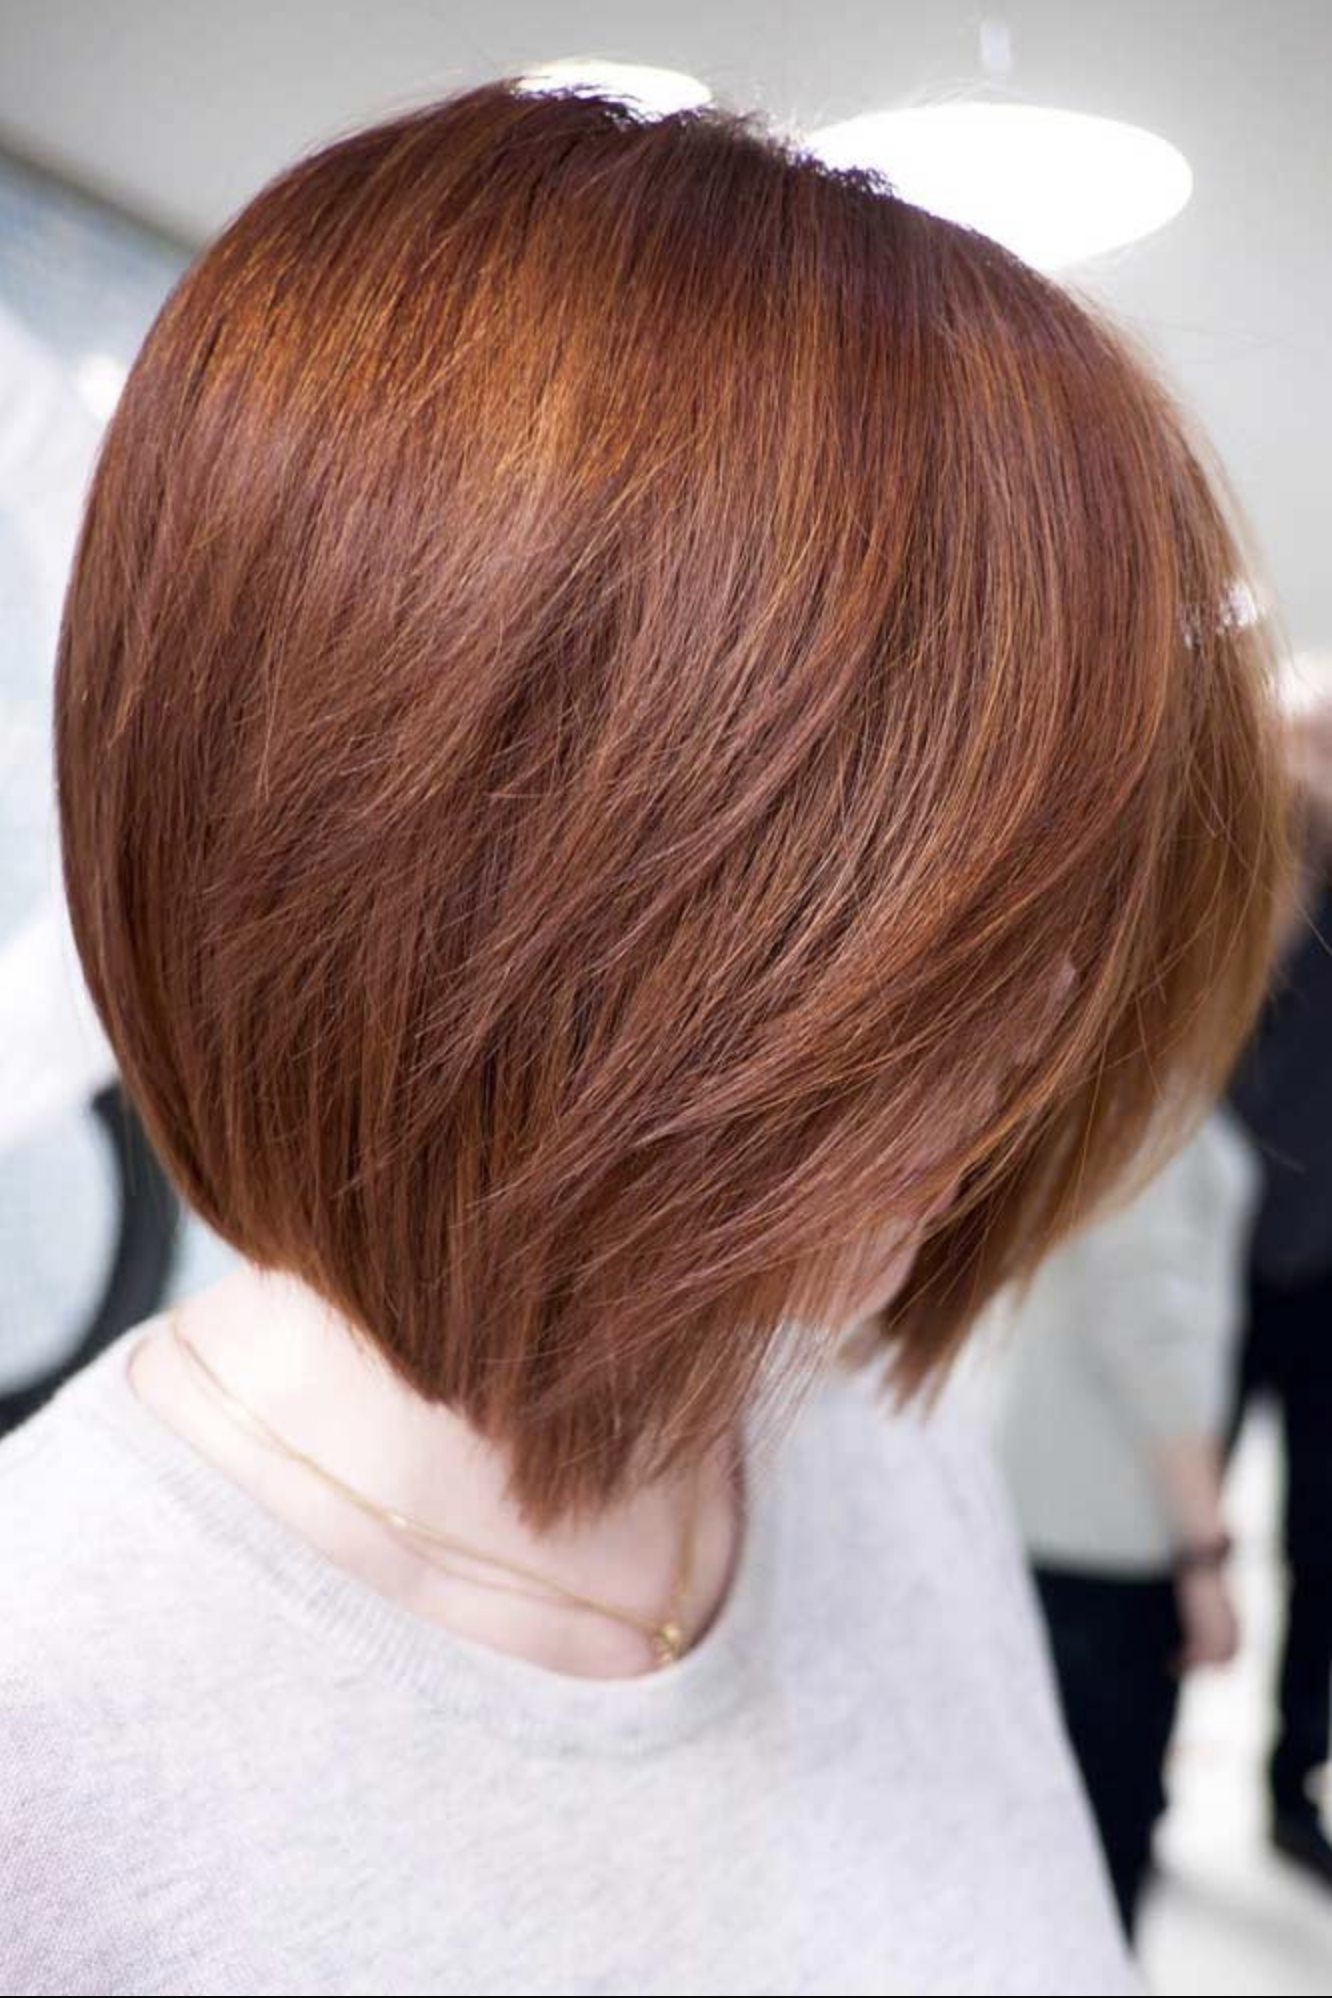 short hair styles for woman over 50